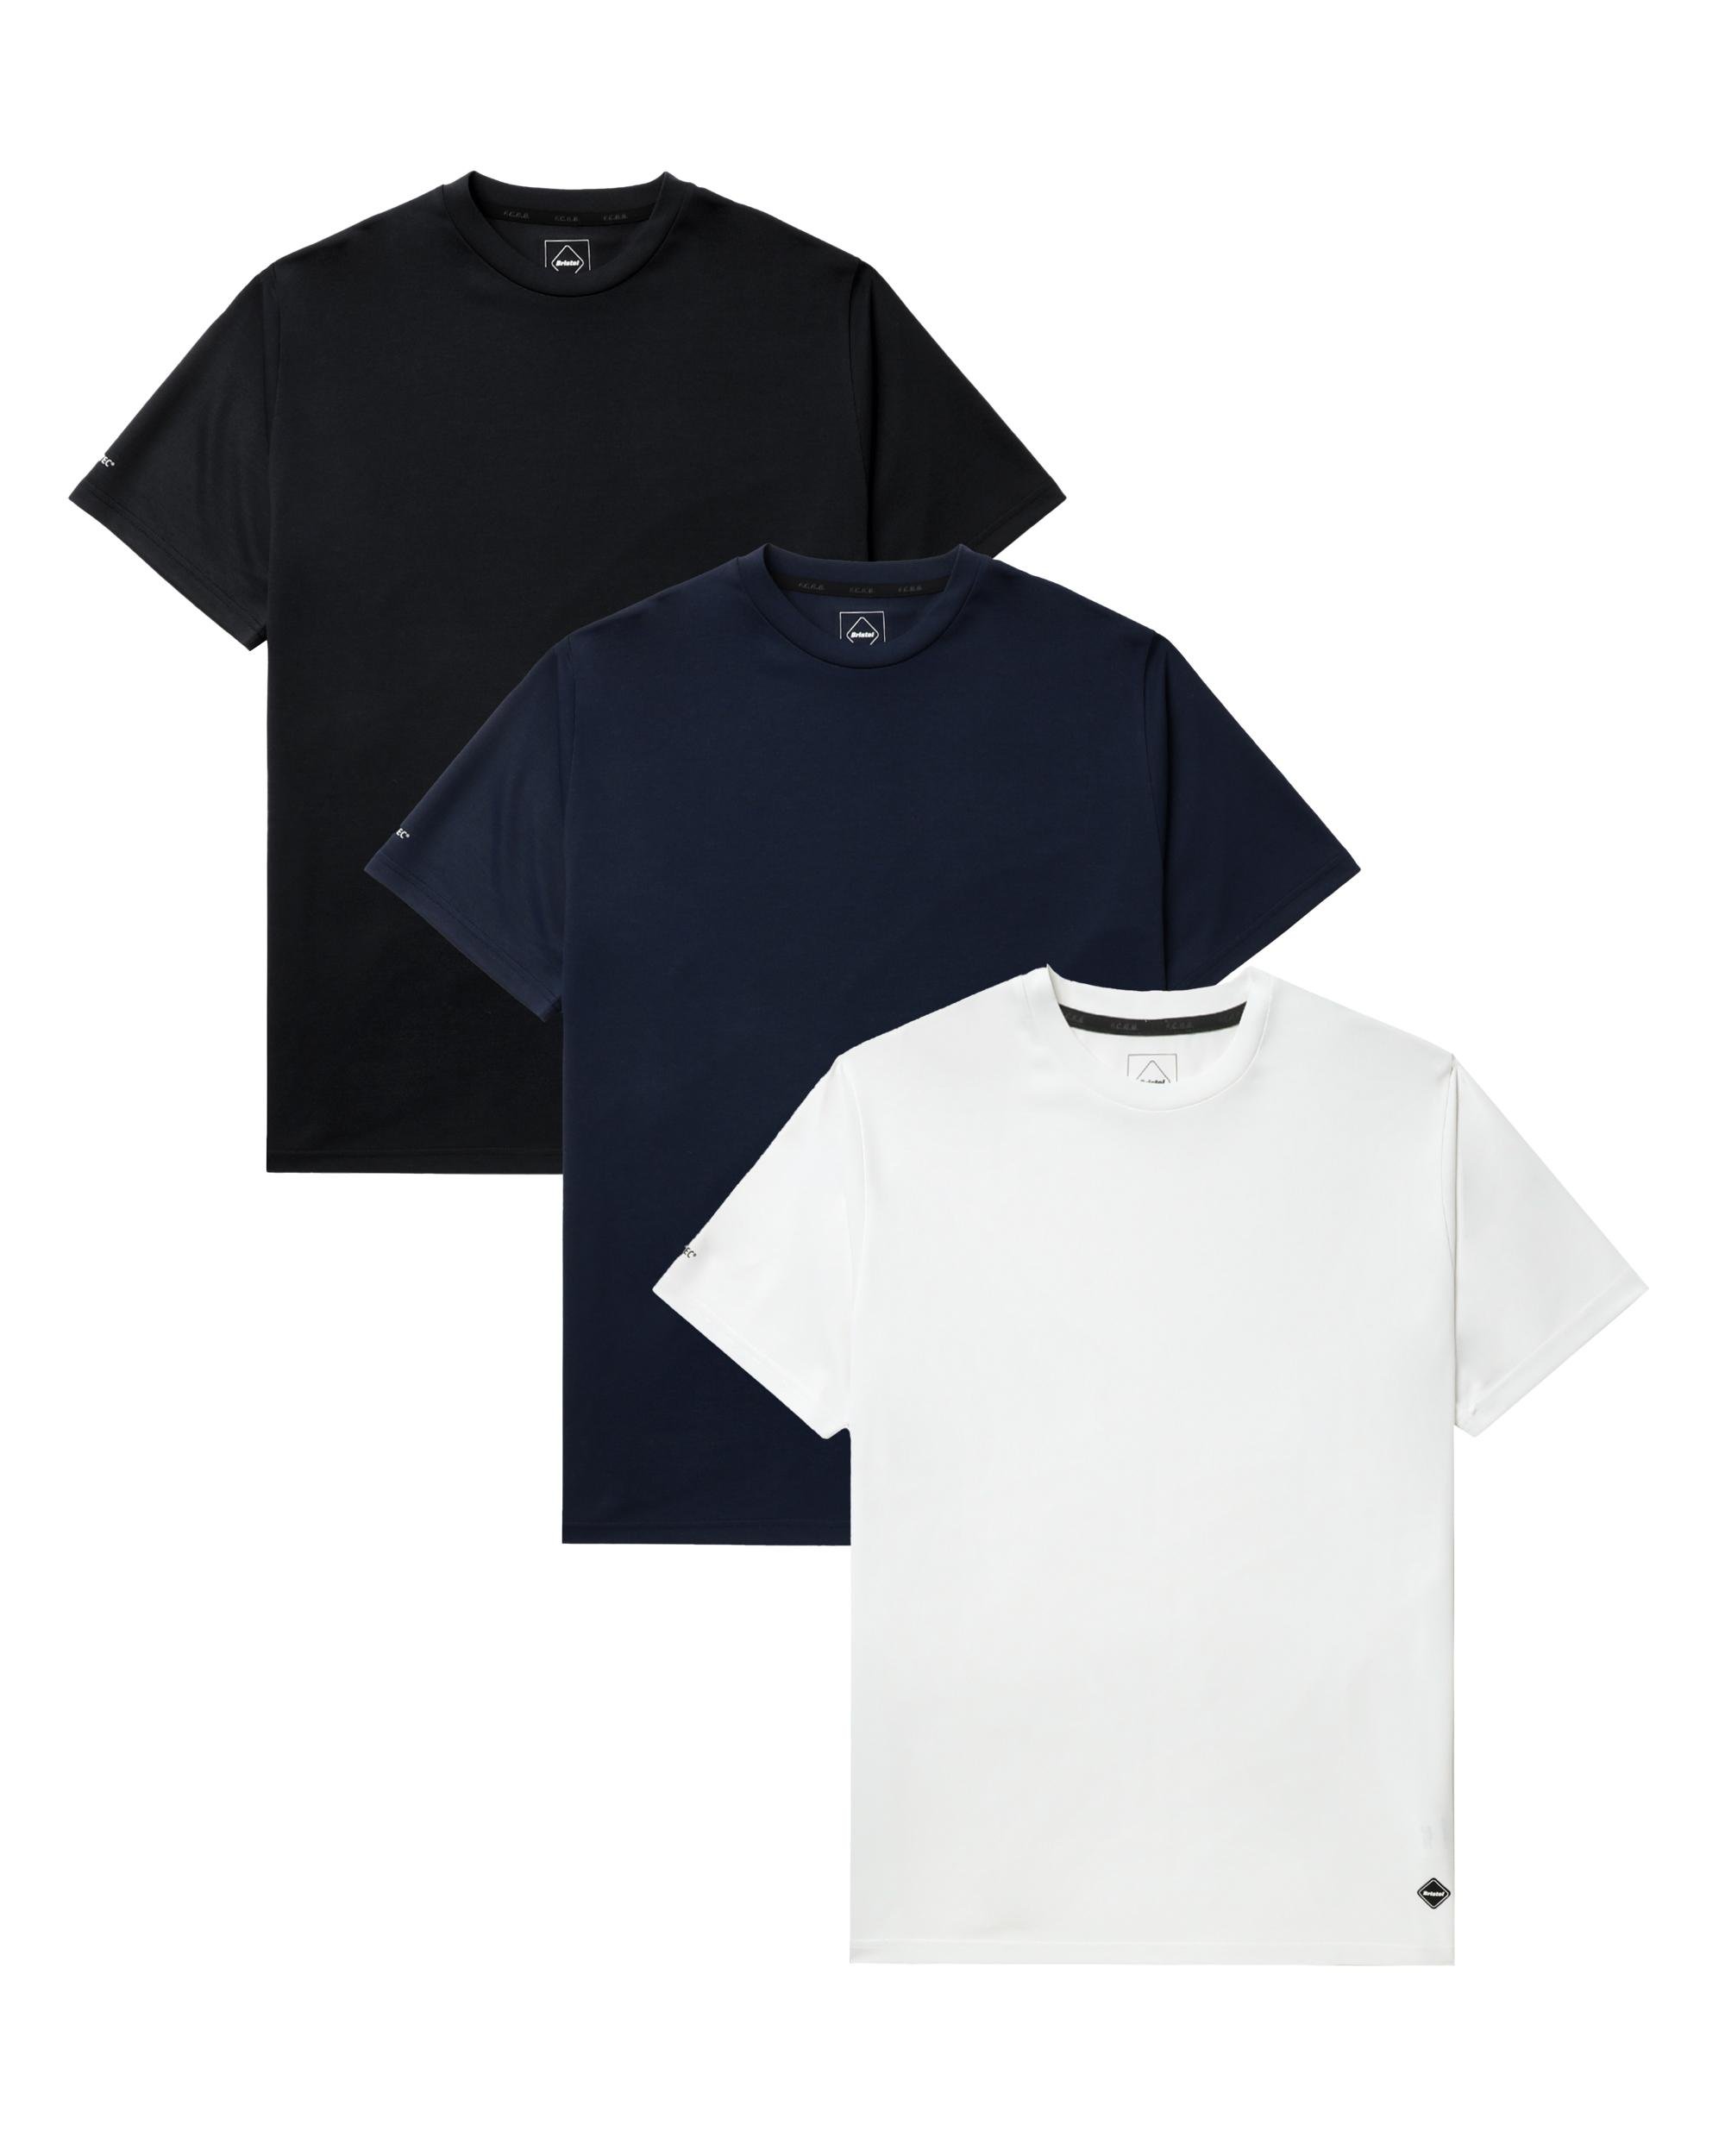 Logo tee - Pack of 3 by F.C. REAL BRISTOL